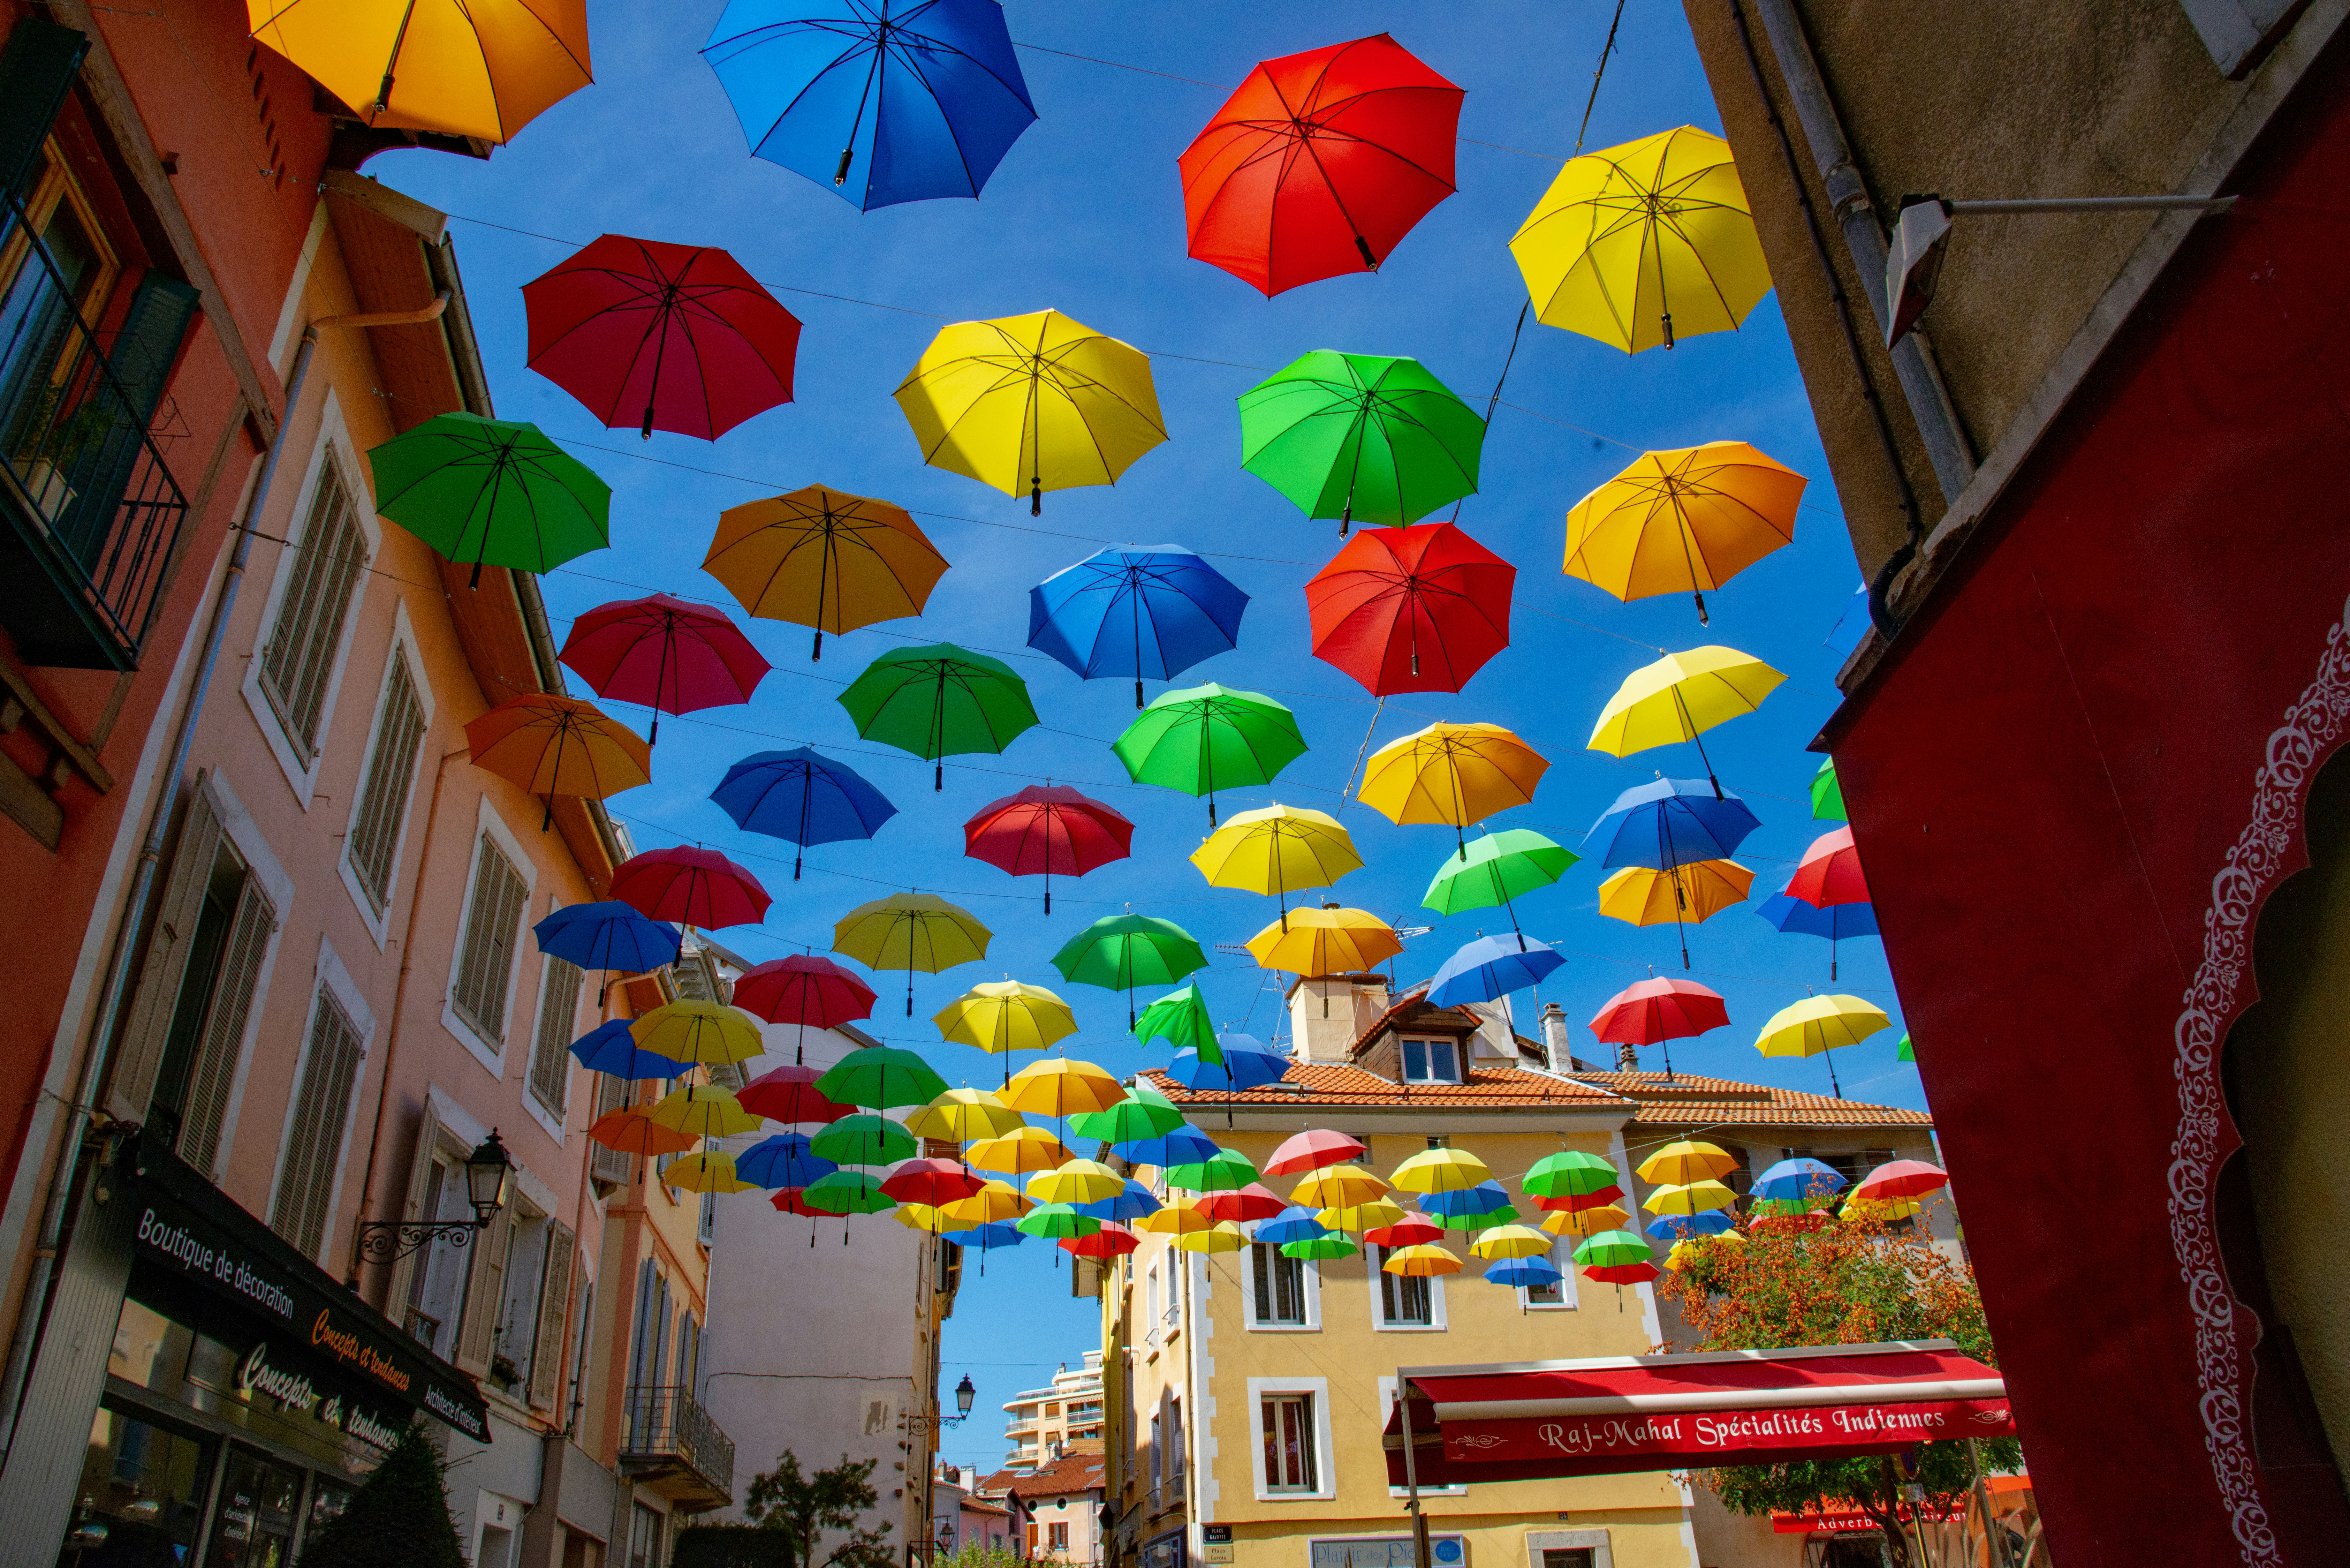 As a class we went on an excursion to a beautiful french city. As we strode around I saw those beautiful umbrellas hanging there over the street, with a beautiful blue sky in the background. So I had to take the picture. In my opinion it is one of the most beautiful pictures I’ve ever made.